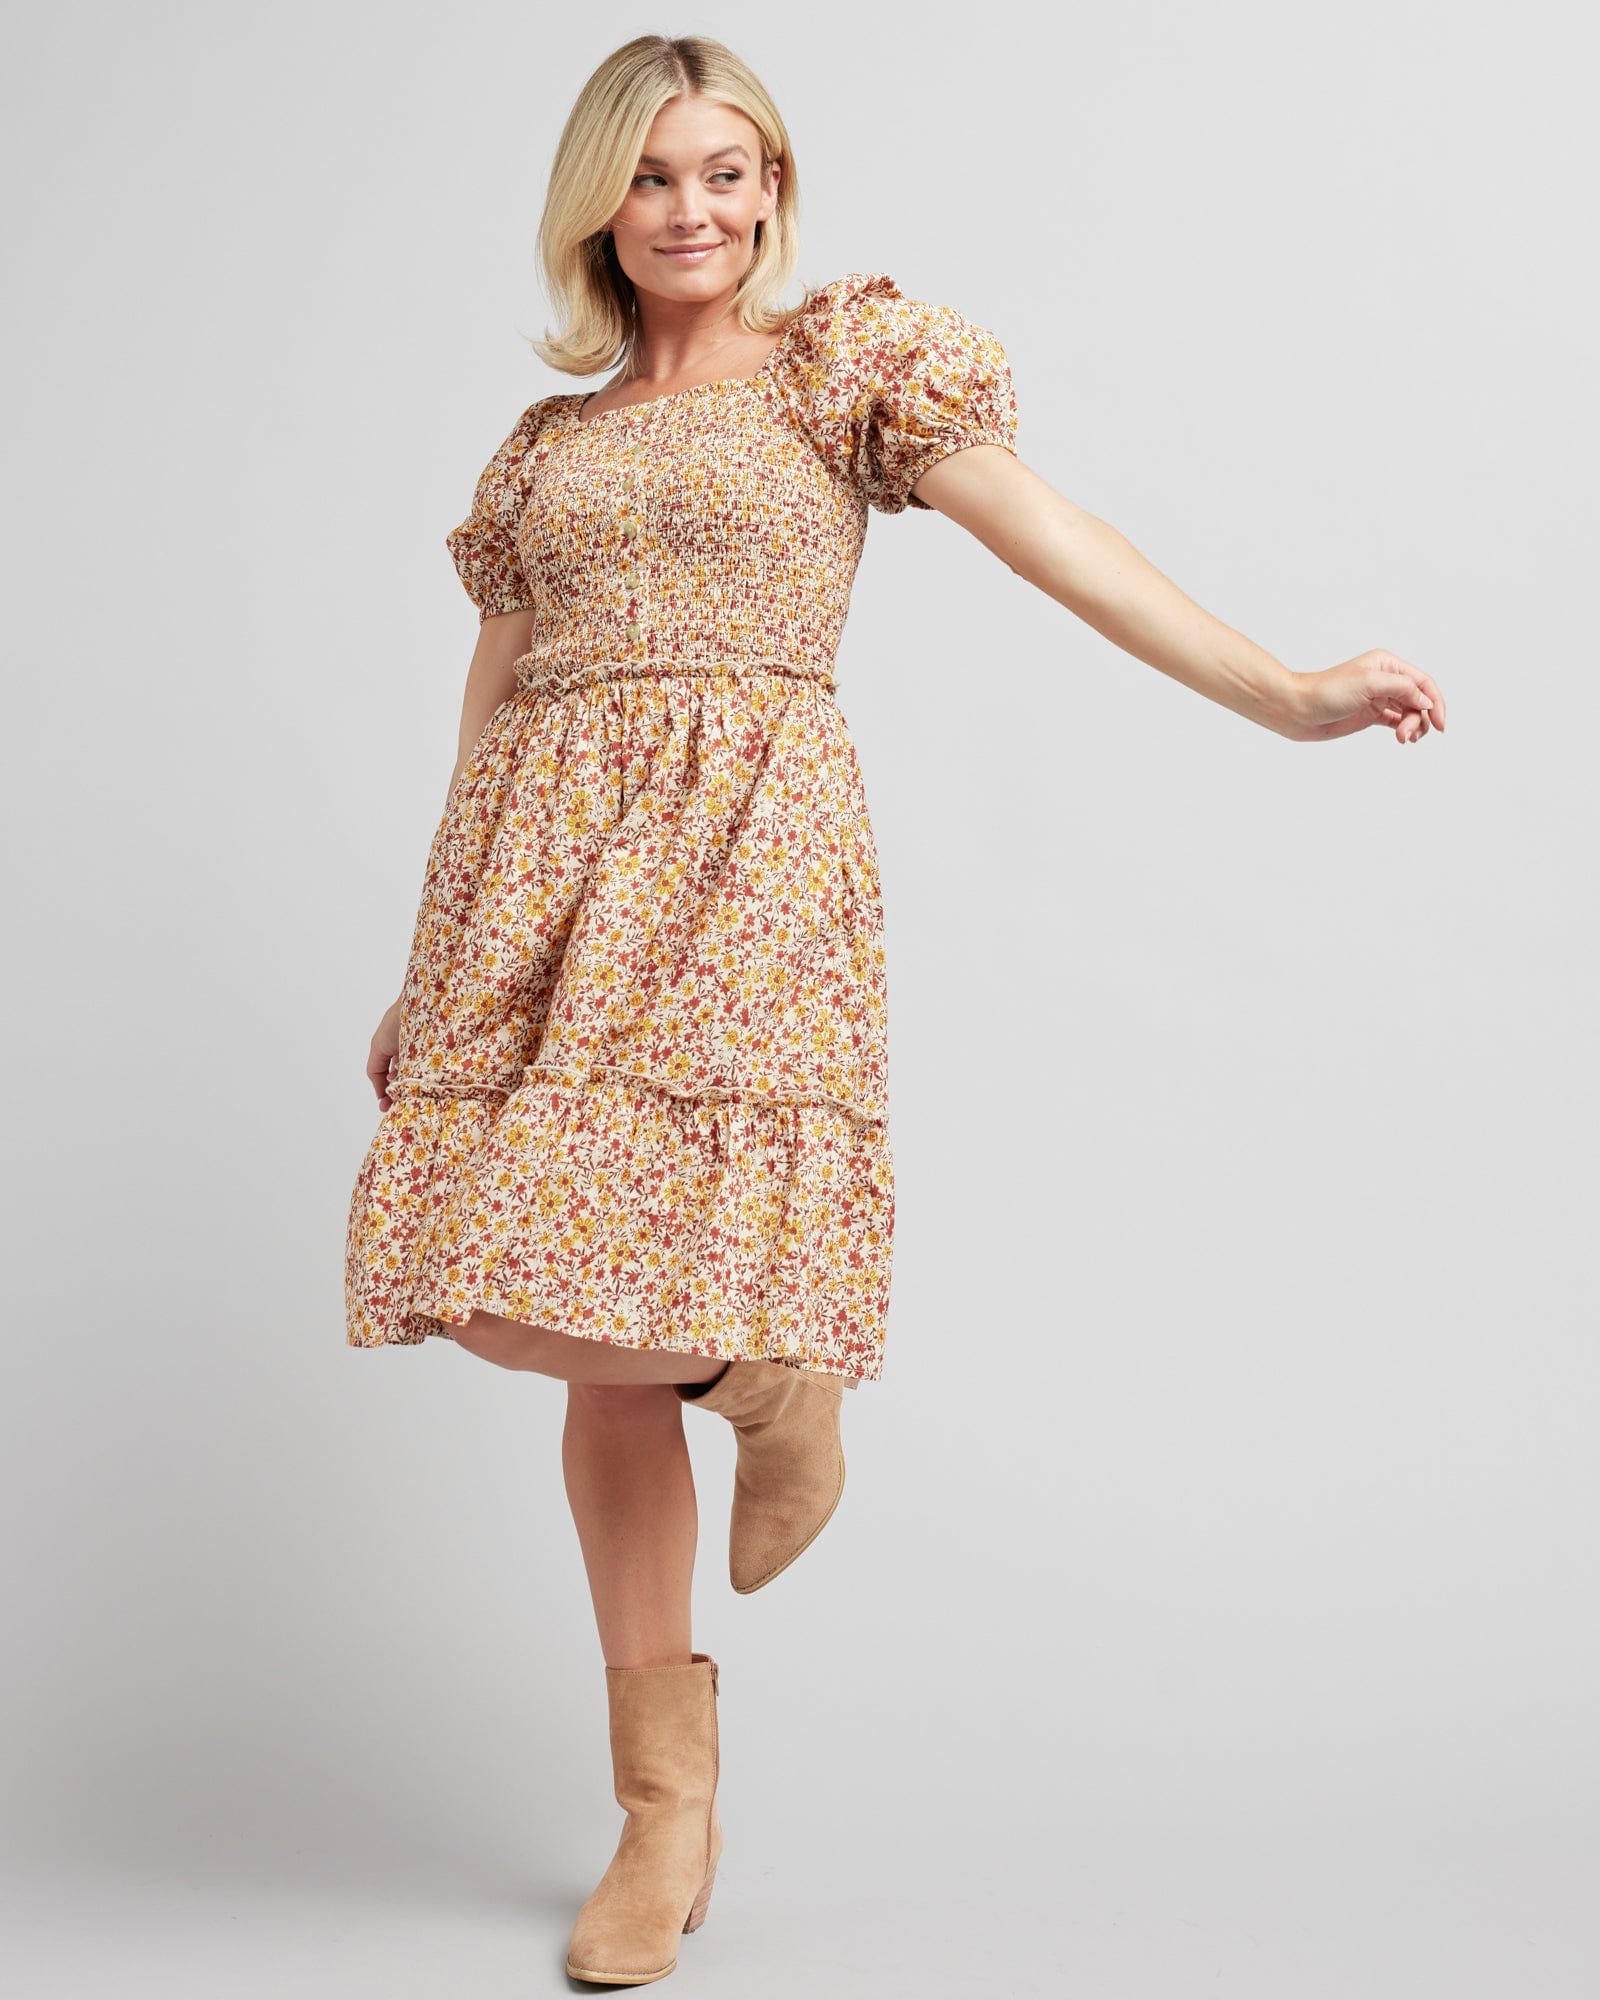 Woman in a short puffed sleeve, knee-length, floral printed dress